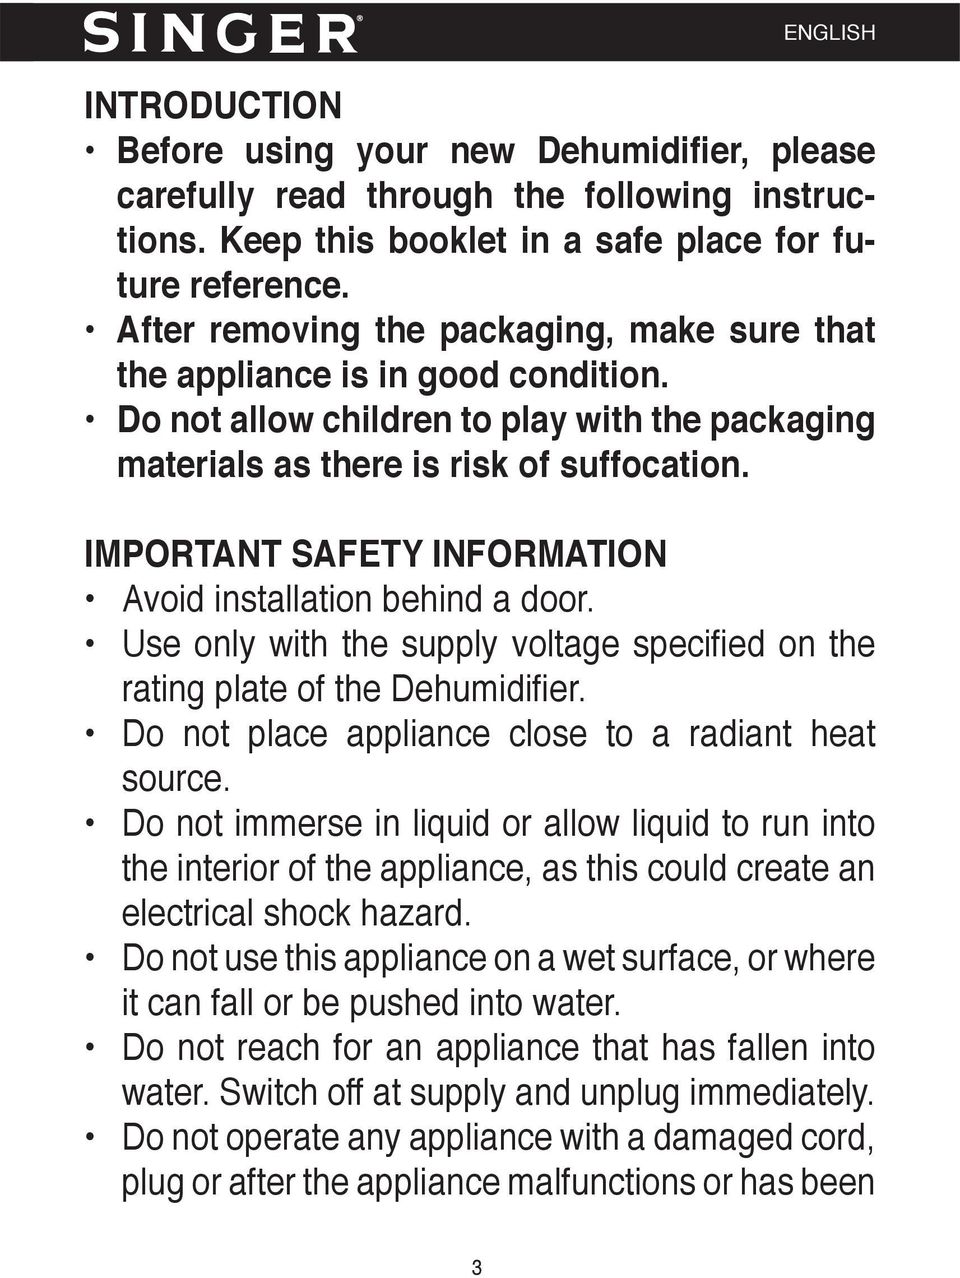 IMPORTANT SAFETY INFORMATION Avoid installation behind a door. Use only with the supply voltage specifi ed on the rating plate of the Dehumidifi er.